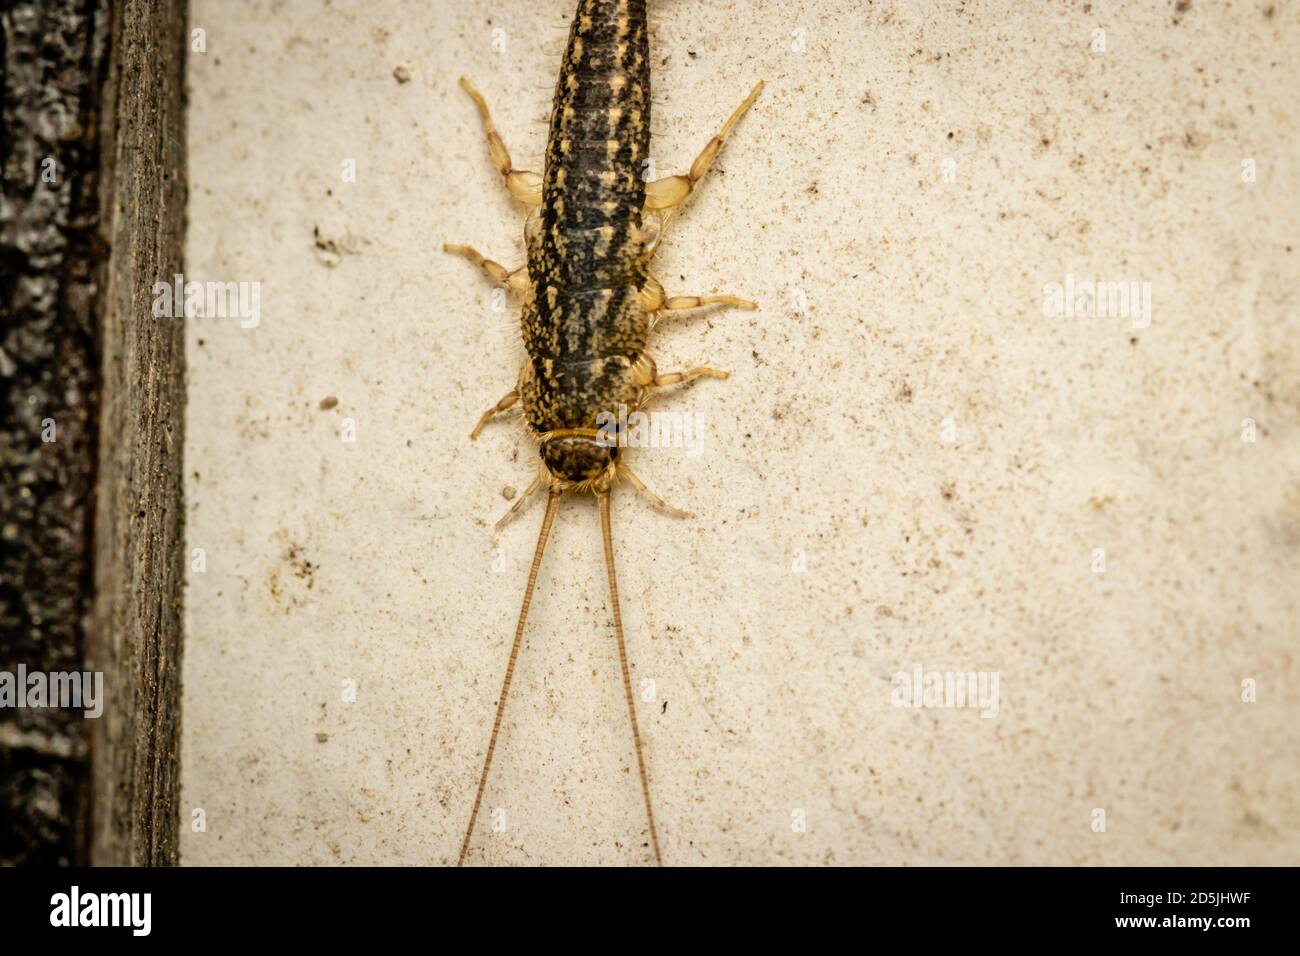 Four-lined silverfish (Ctenolepisma lineatum) close up picture at night Stock Photo